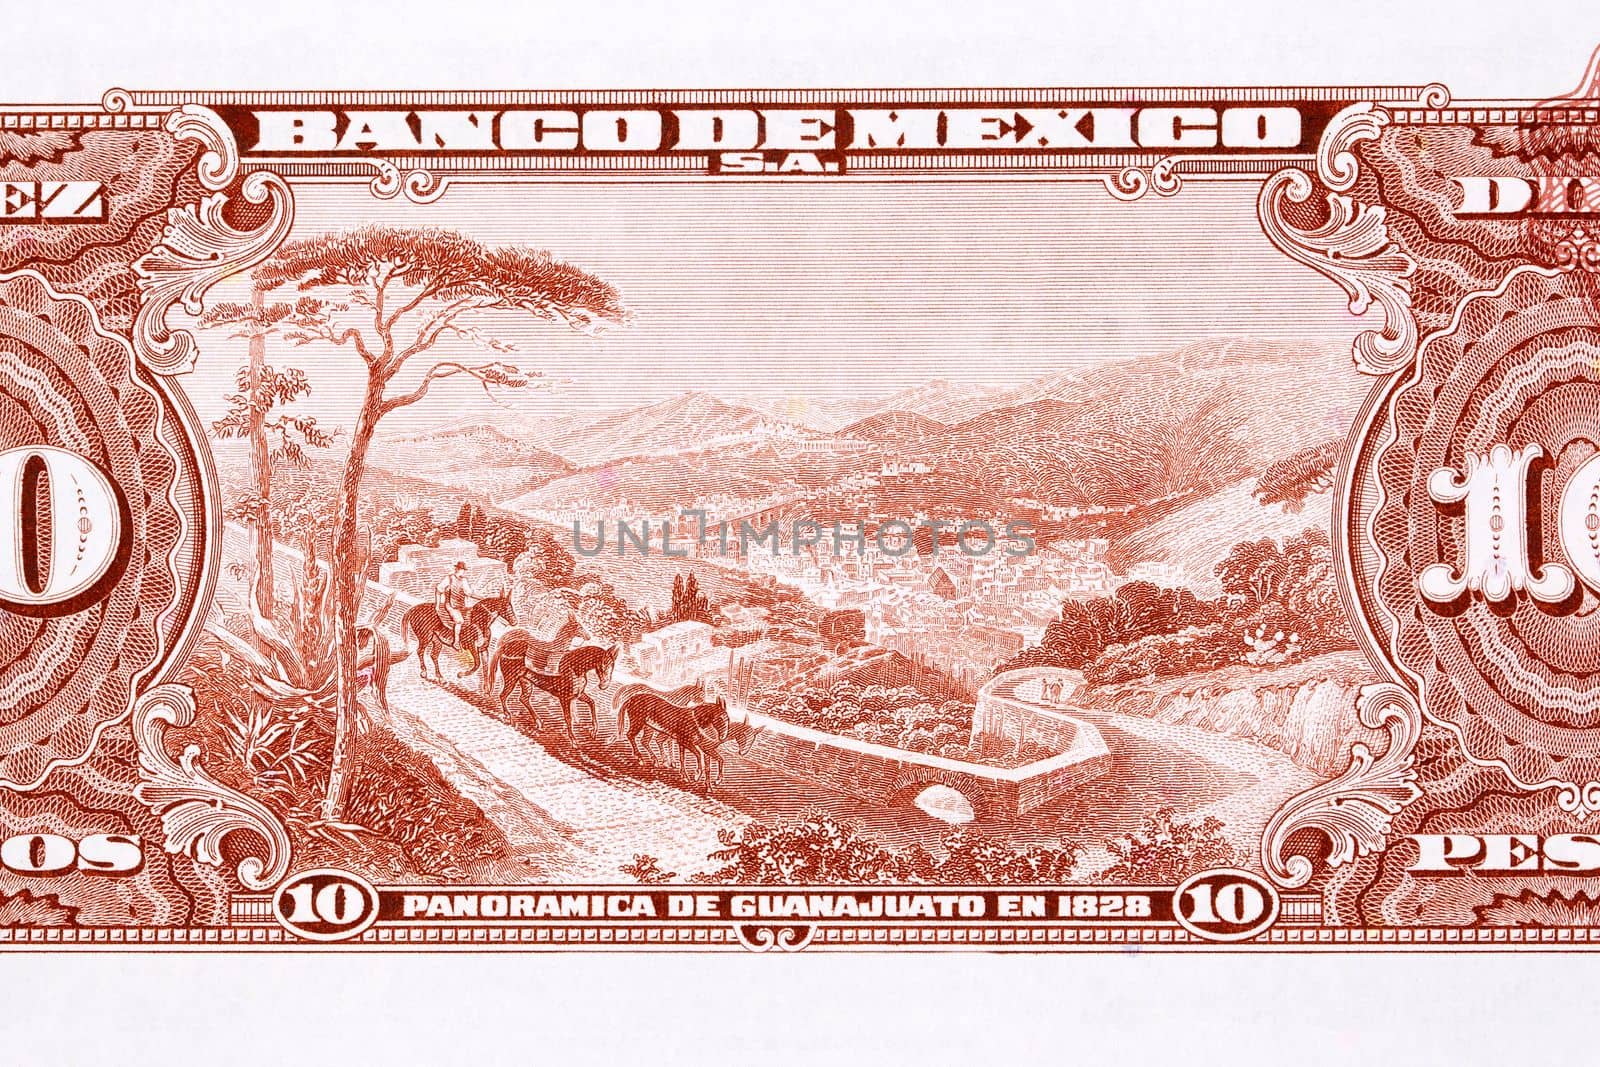 State of Guanajuato from old Mexican money  by johan10